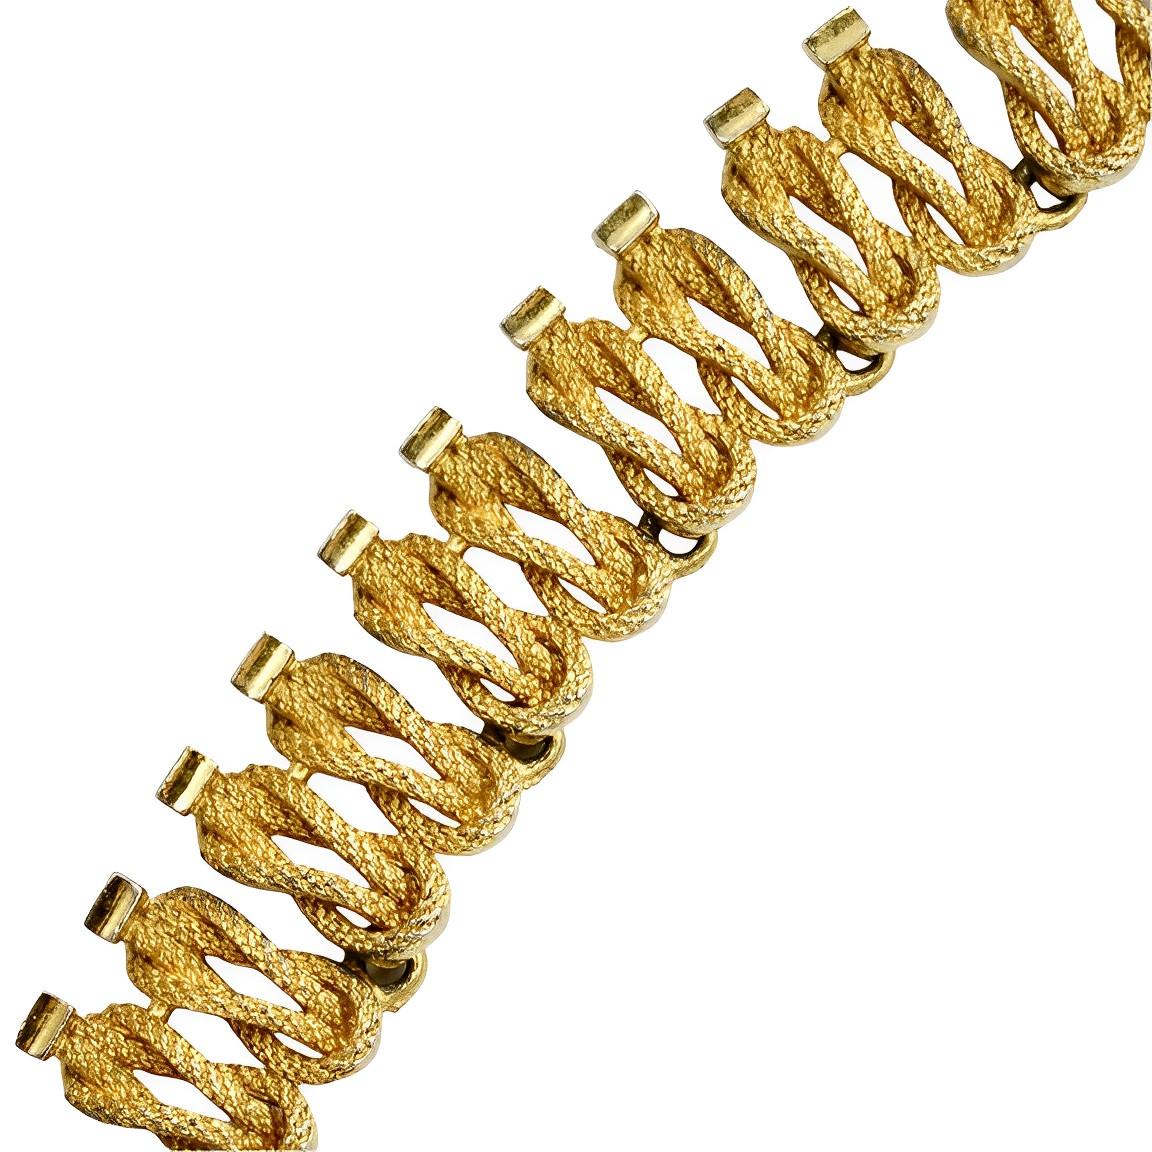 Gold Plated Textured Knot Design Link Necklace circa 1950s For Sale 1